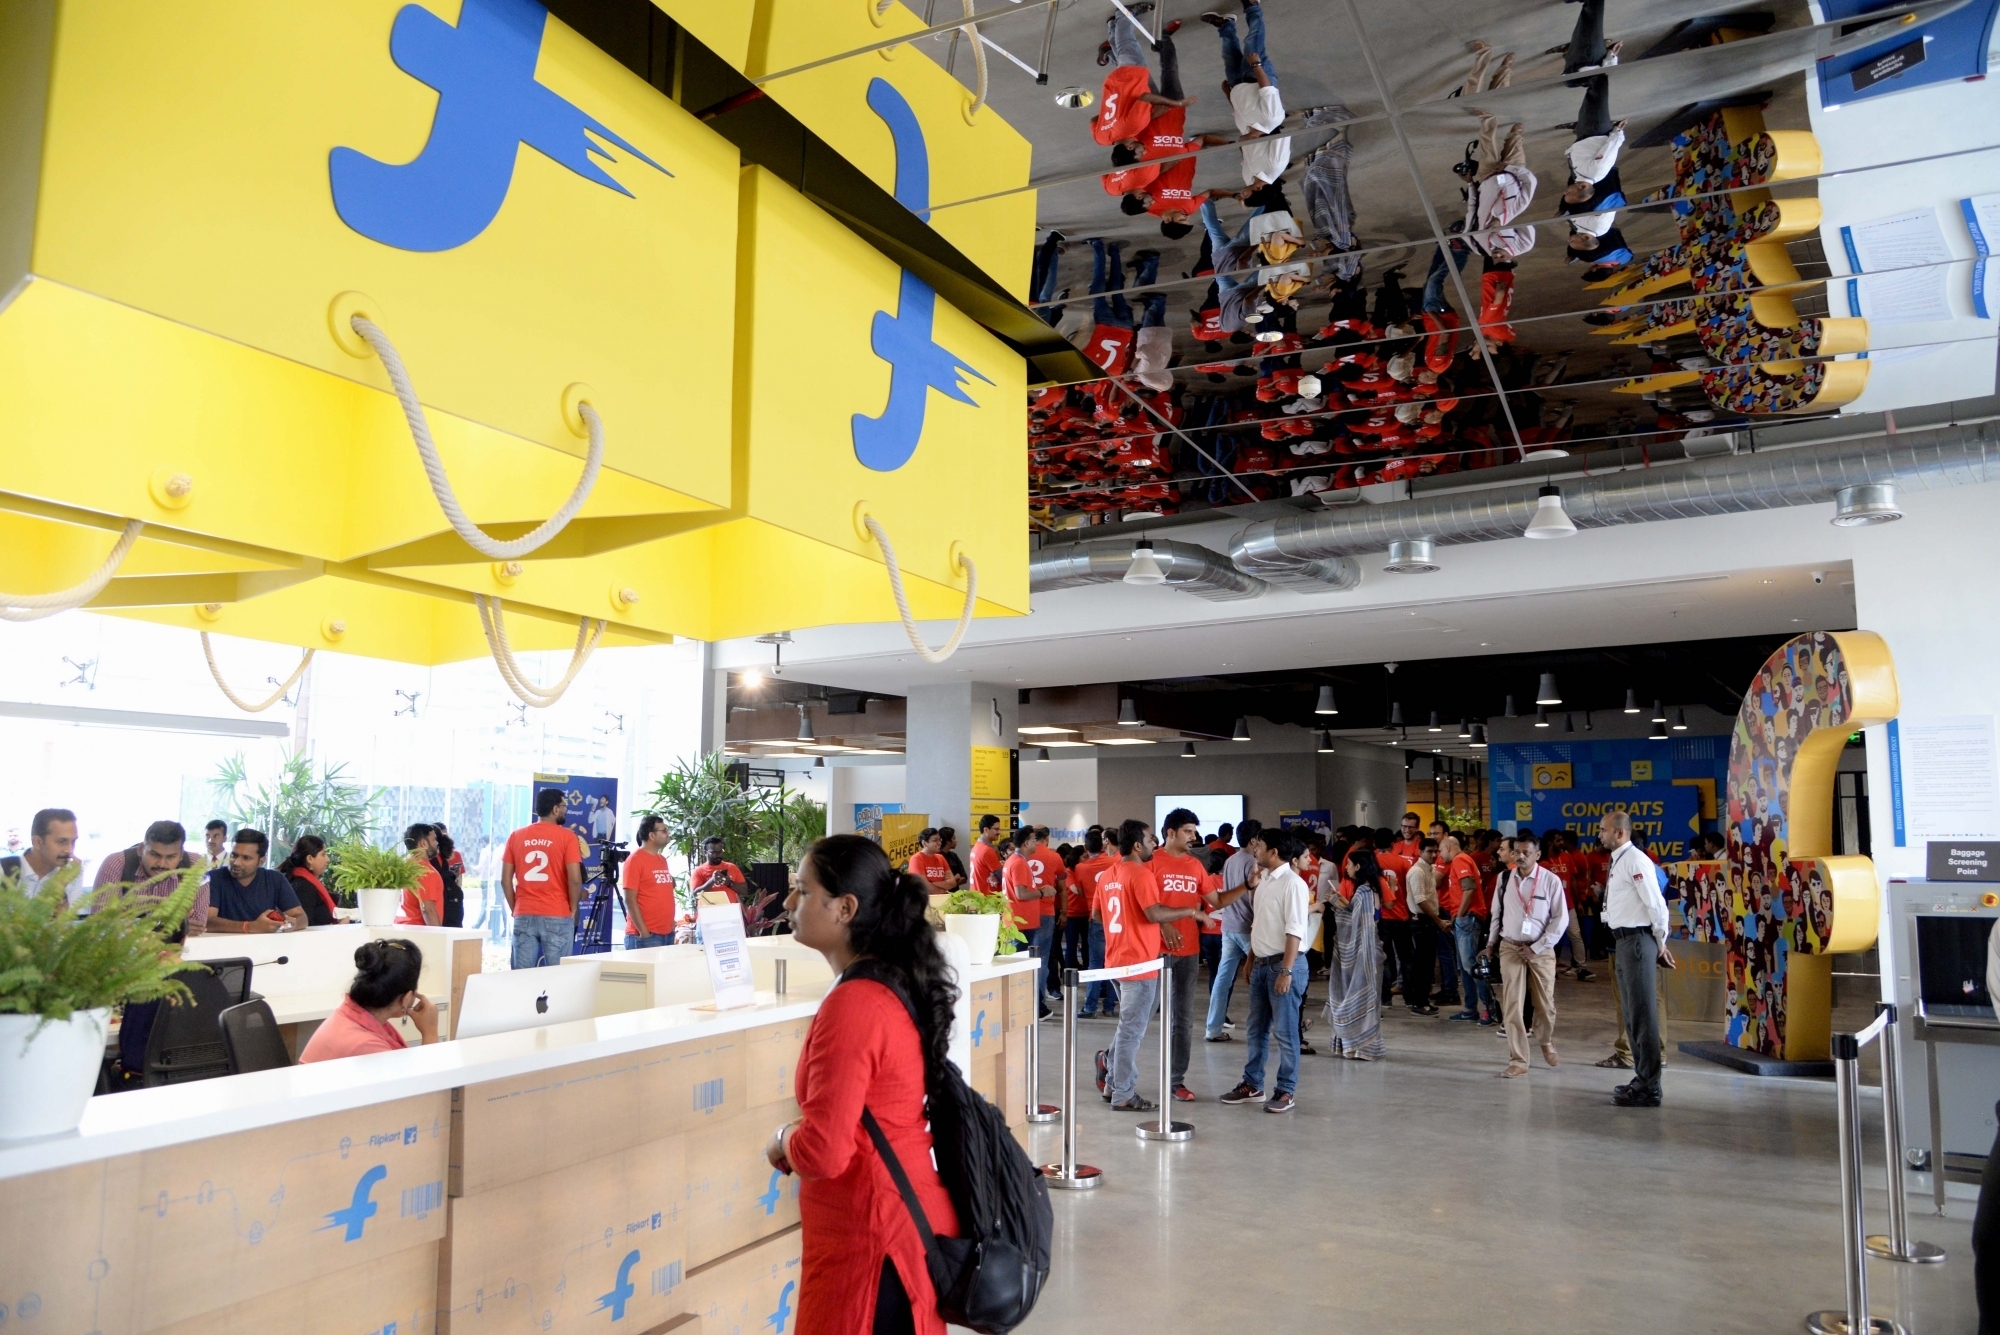 Flipkart hires 23K to bolster its supply chain amid pandemic